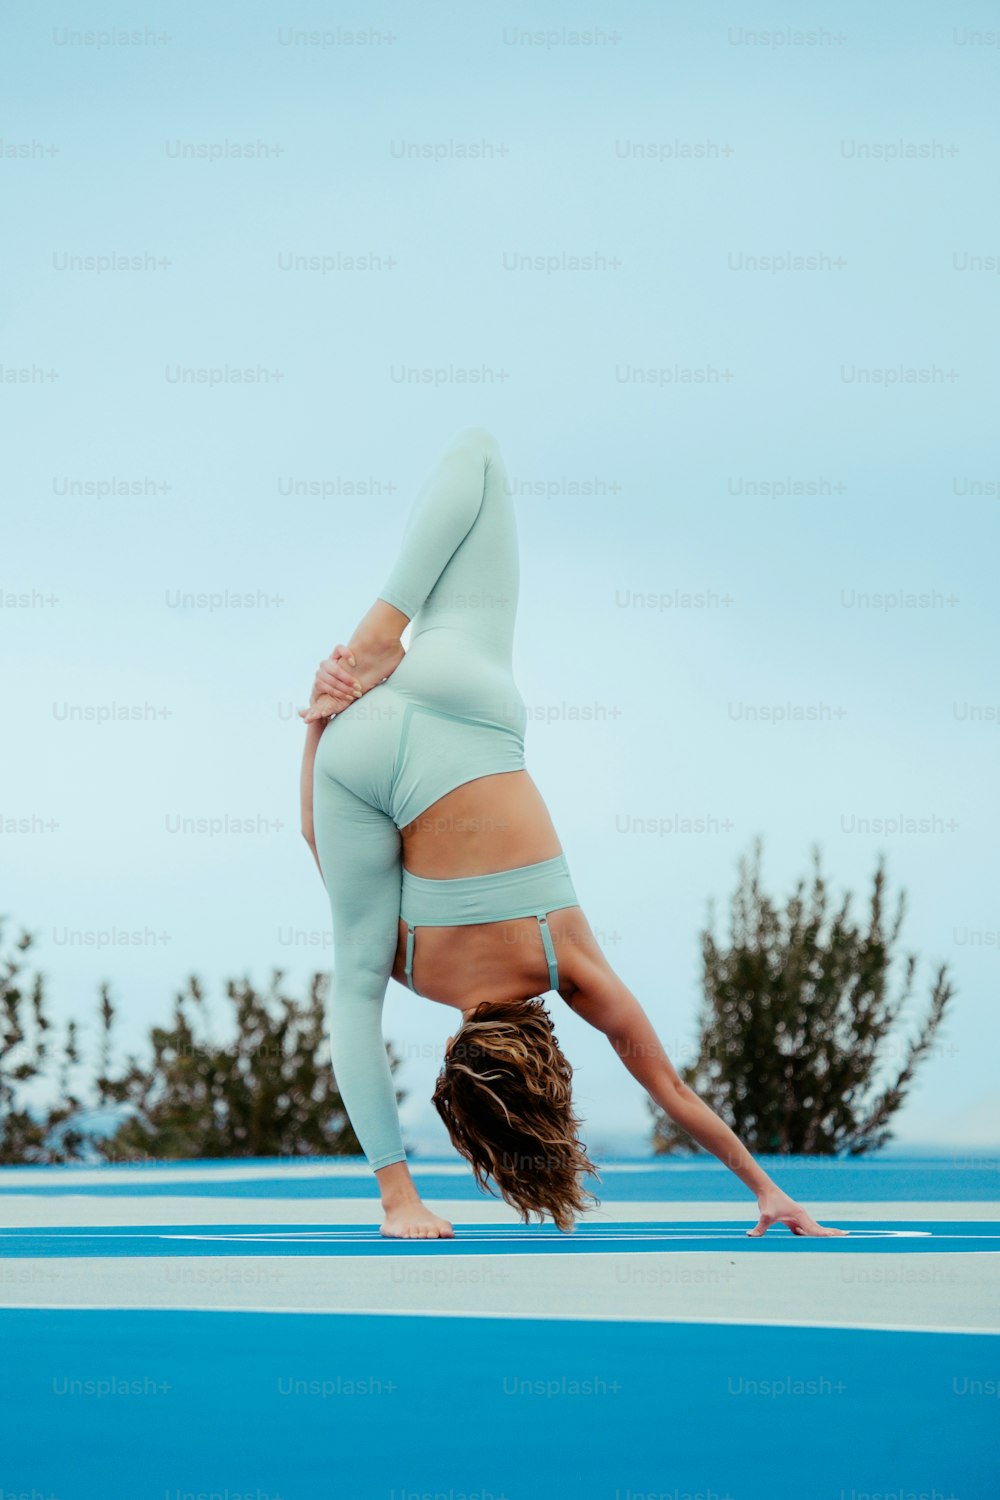 a woman doing a handstand on a blue surface